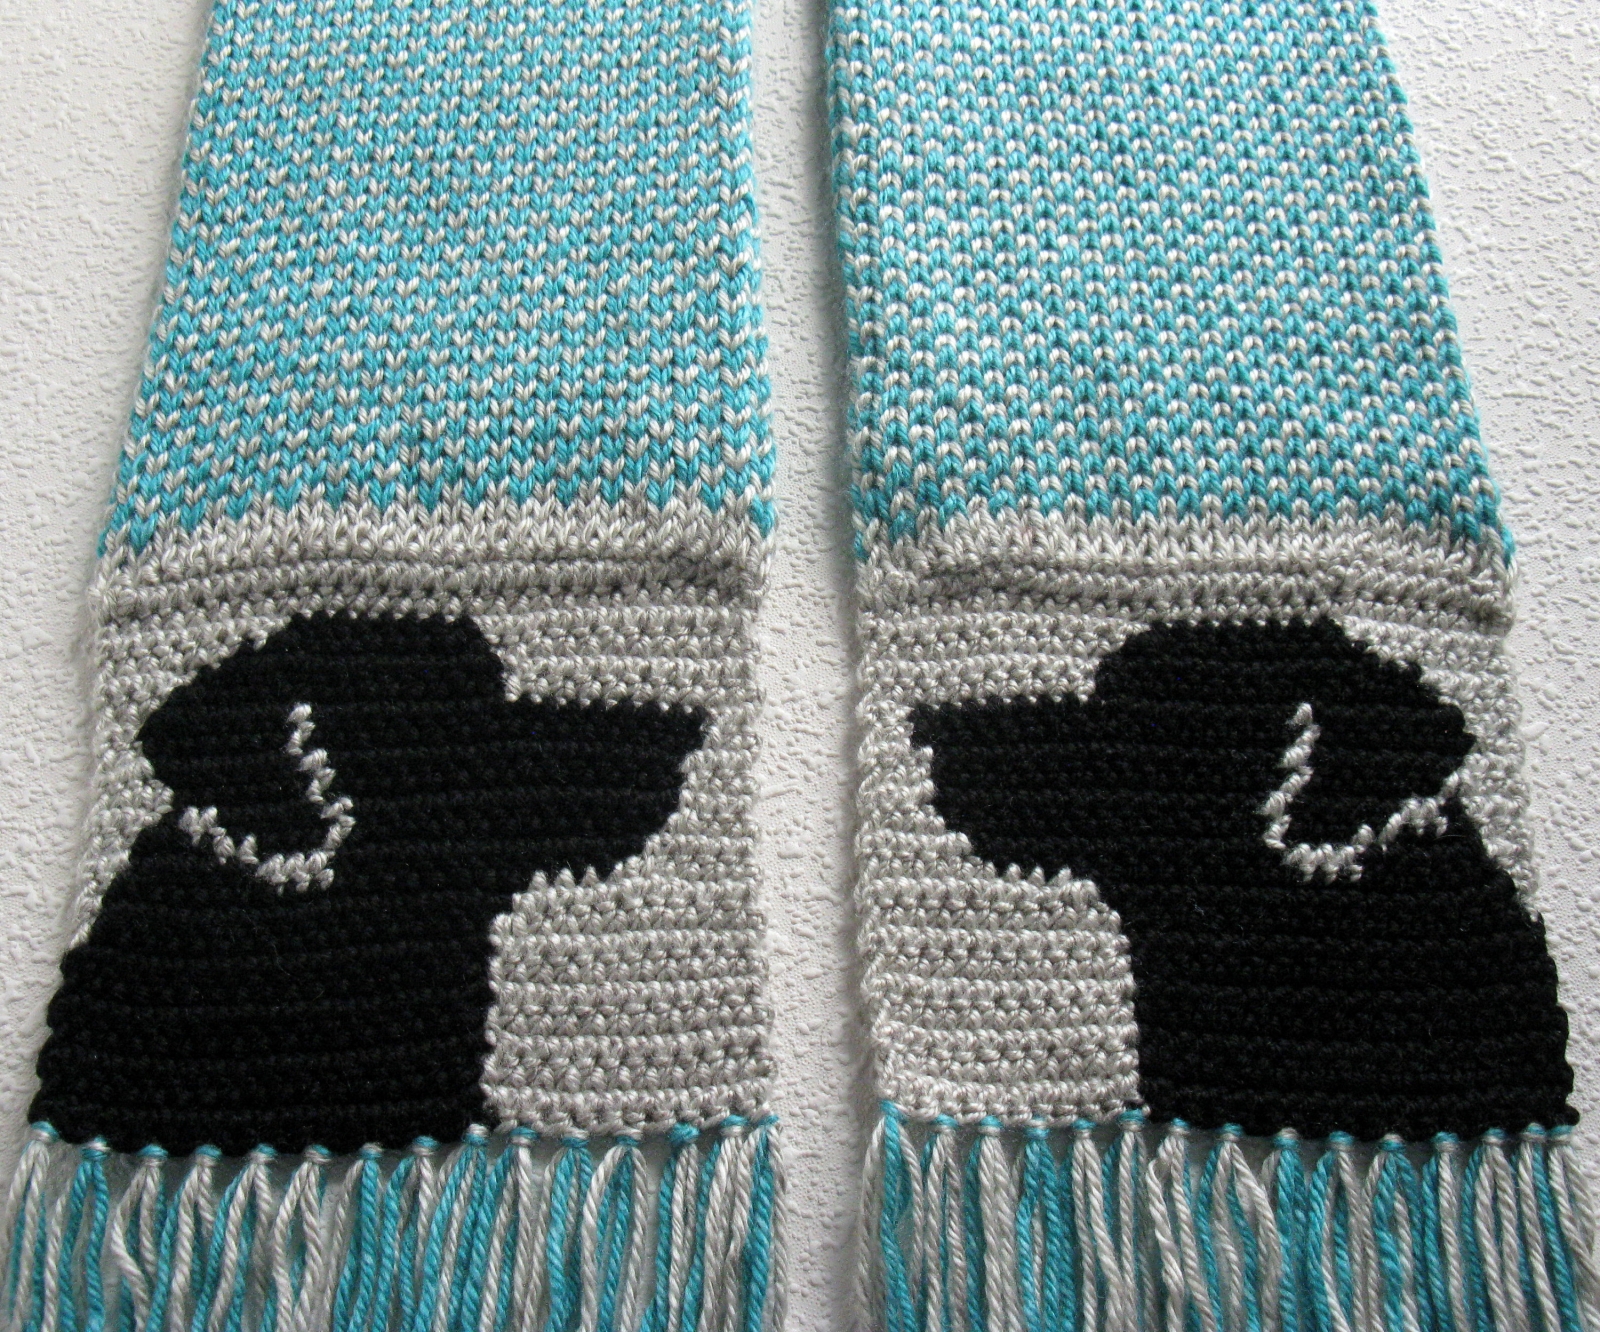 Long Labrador Scarf. Gray and turquoise blue, fair isle knit scarf with ...